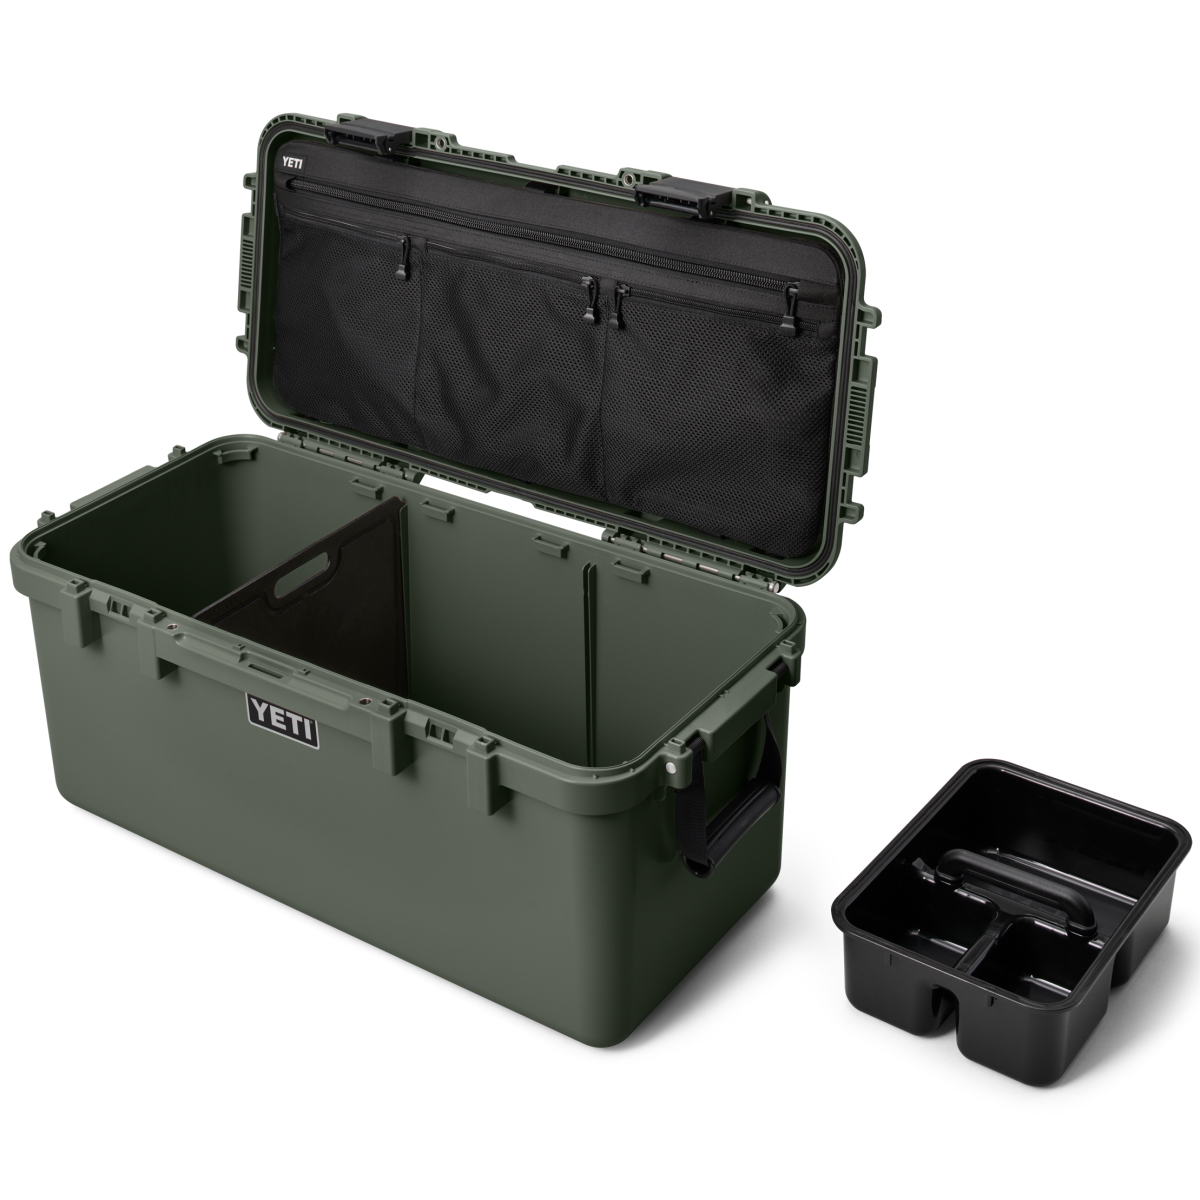  YETI LoadOut 15 GoBox Divided Cargo Case, Camp Green